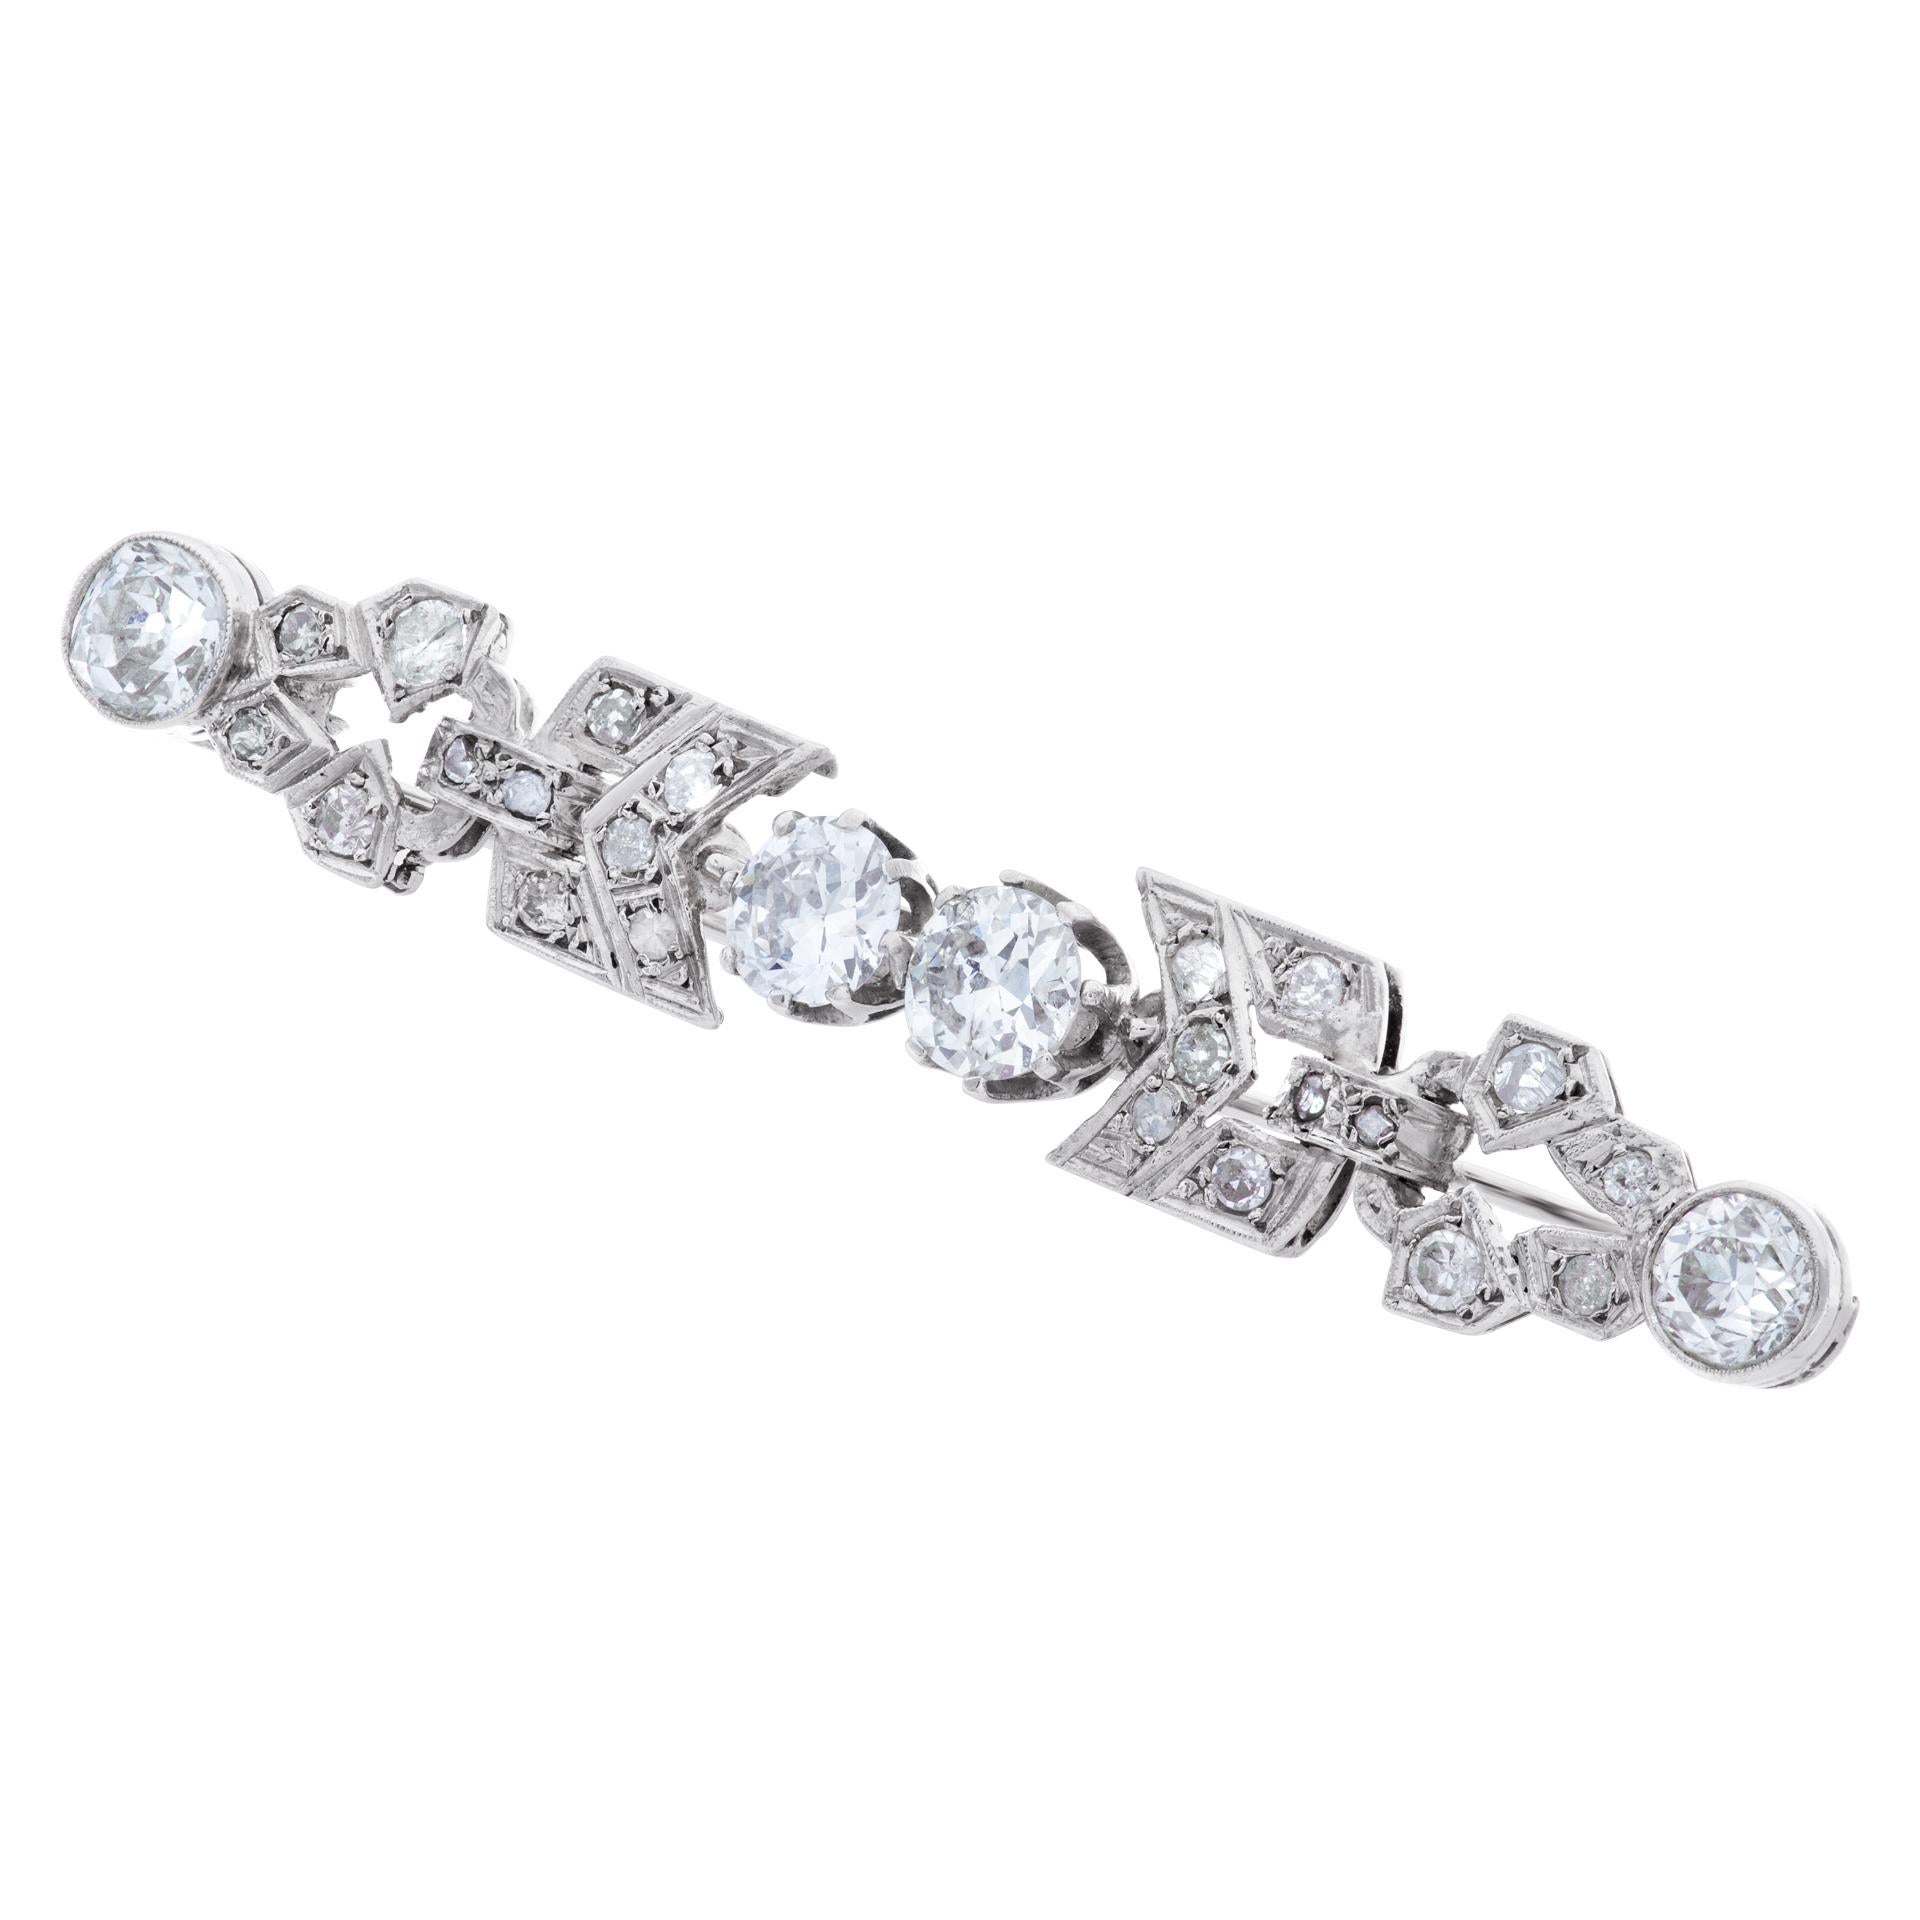 ESTIMATED RETAIL $9,000 - YOUR PRICE $5,880 - Art Deco Platinum pin with approximately over 2 carats in European cut diamonds with (G-H color, SI1 clarity). Length: 2.3